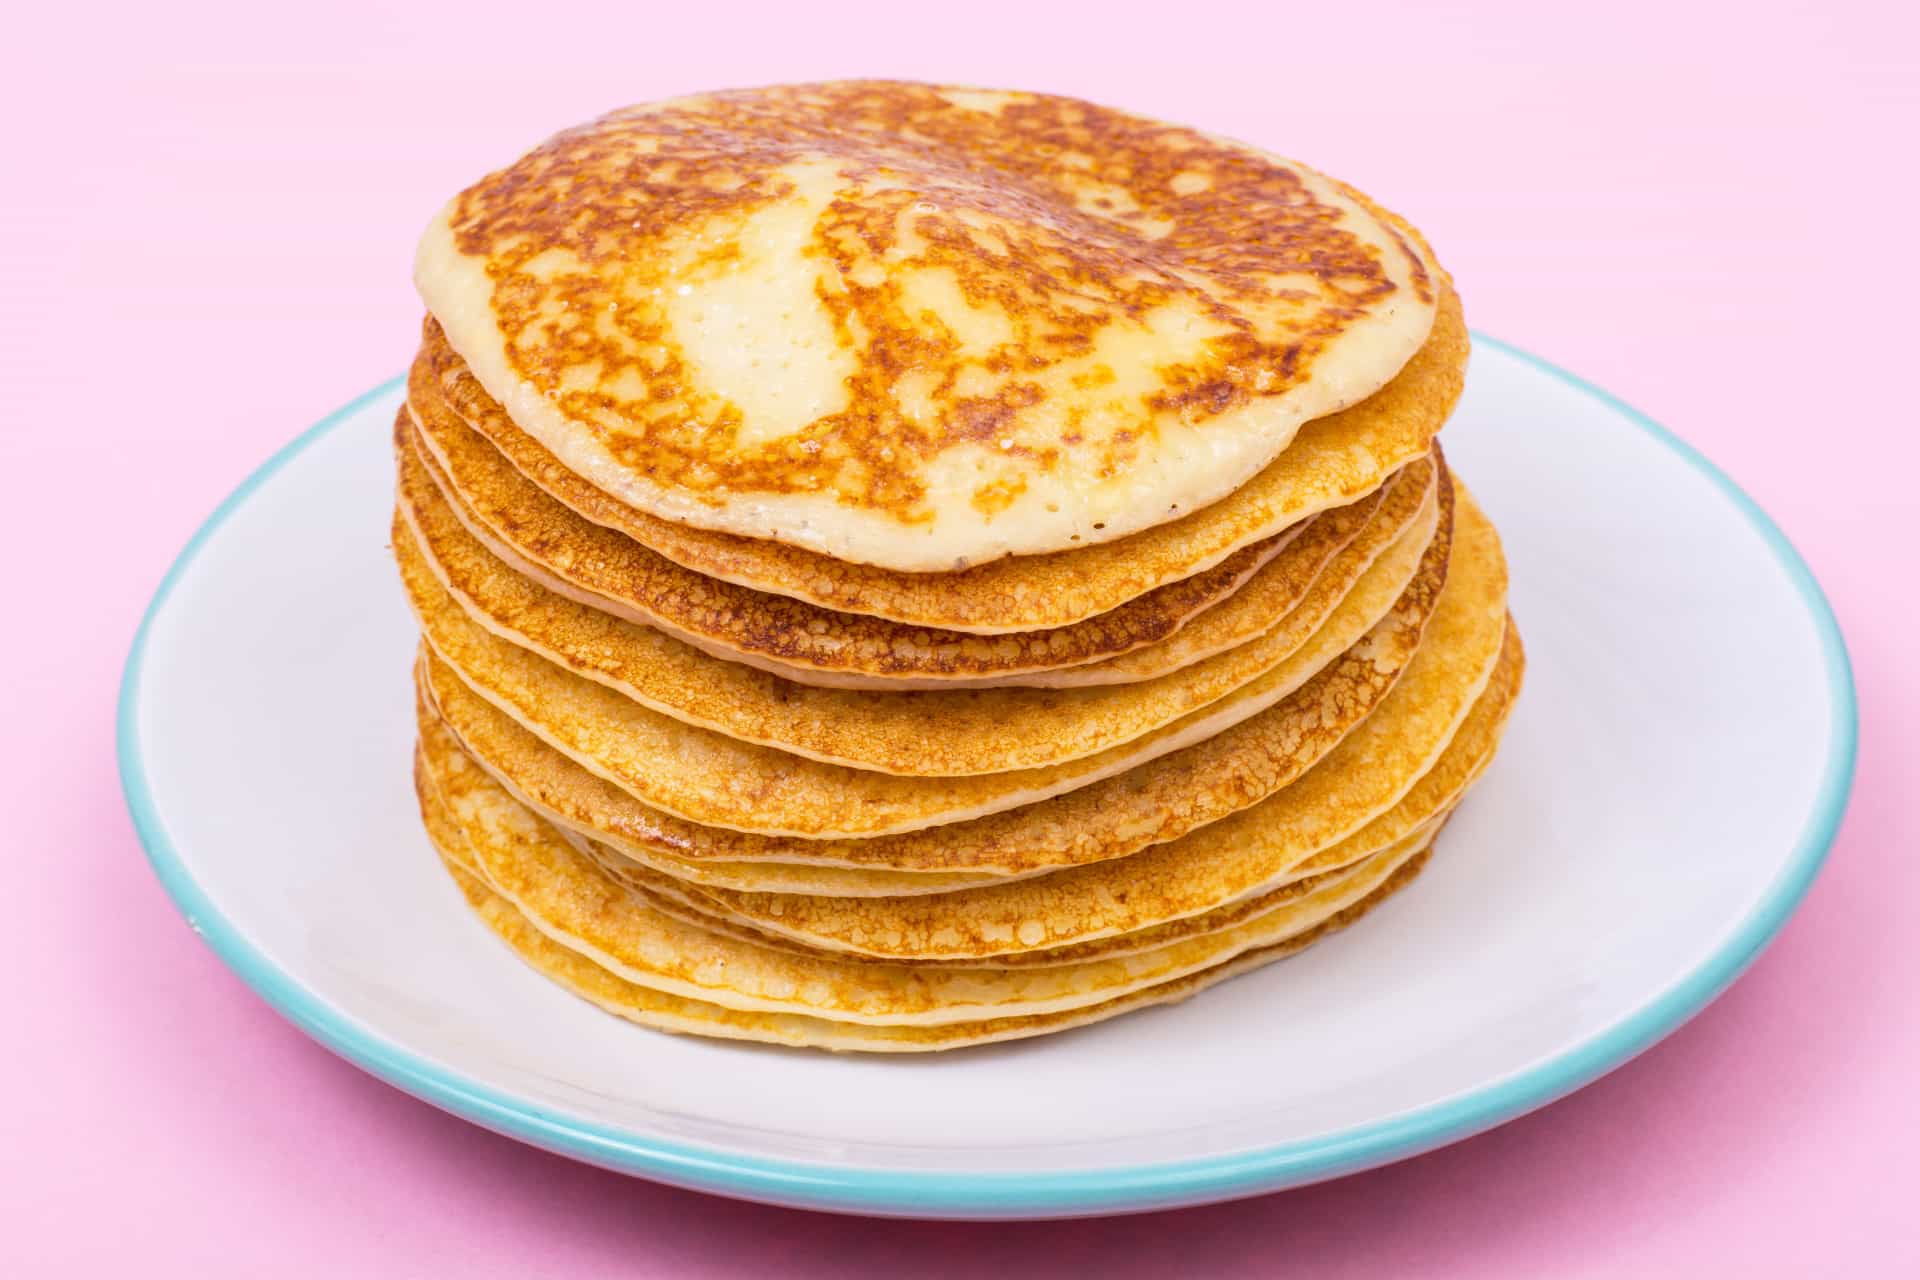 <p>"I found jalapeños in my pancakes...I went to the manager to tell him of the mistake...Instead of apologizing, the manager went ballistic!!!"</p><p>See also: <a href="https://www.msn.com/en-au/travel/other/food-facts-that-airlines-dont-want-you-to-know/ss-BB106yNA?li=BBZaj3P"><span>Food facts that airlines don't want you to know</span></a></p>